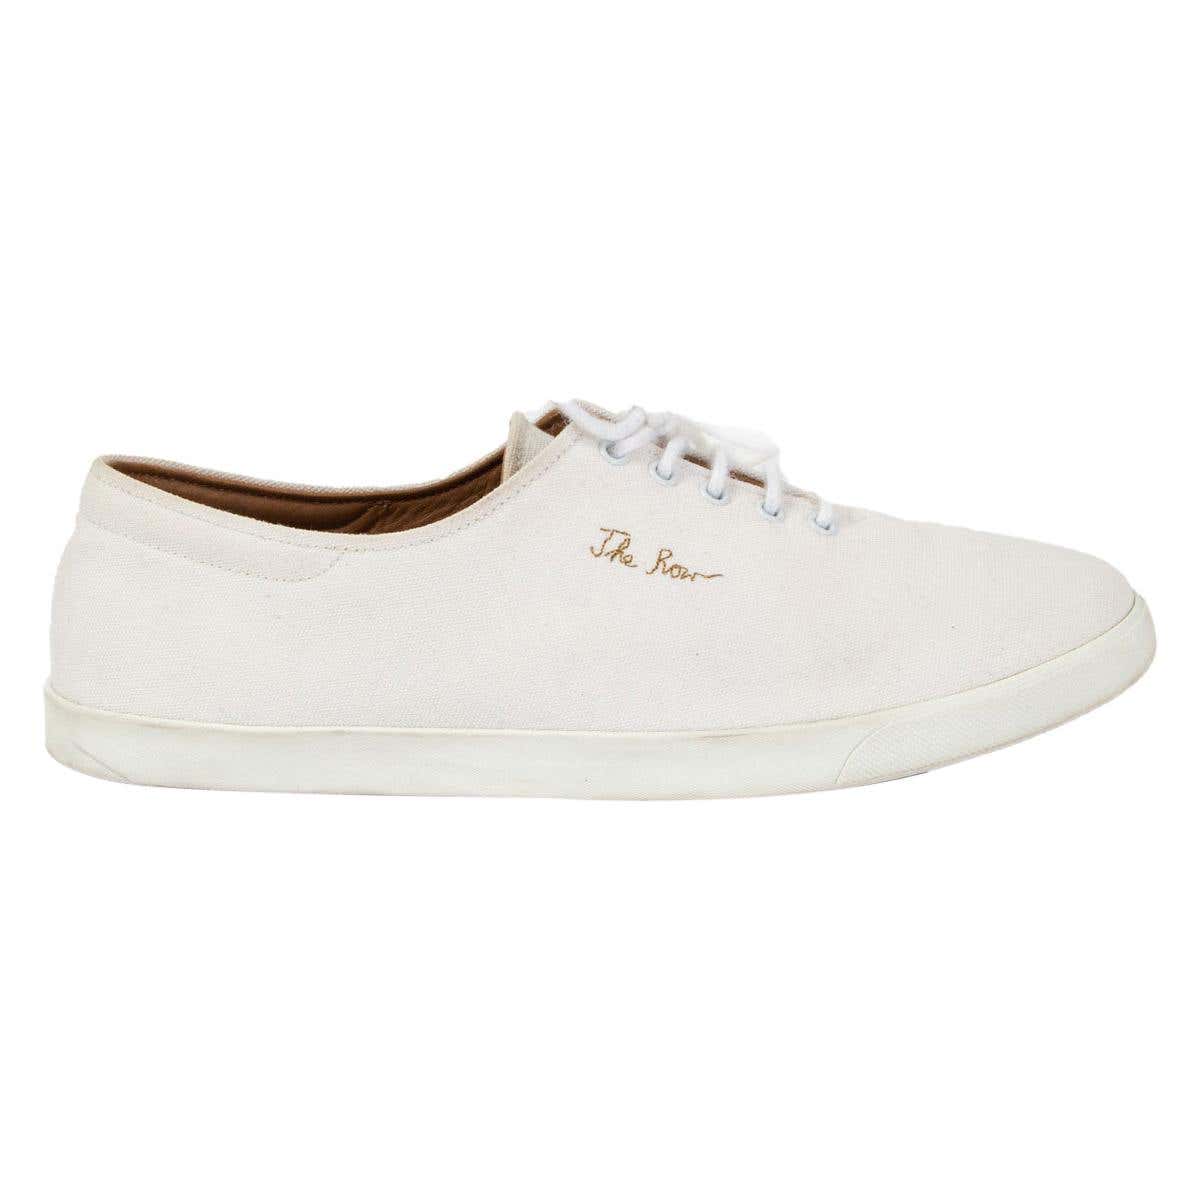 THE ROW off-white canvas DEAN Low Top Sneakers Shoes 38.5 For Sale at ...